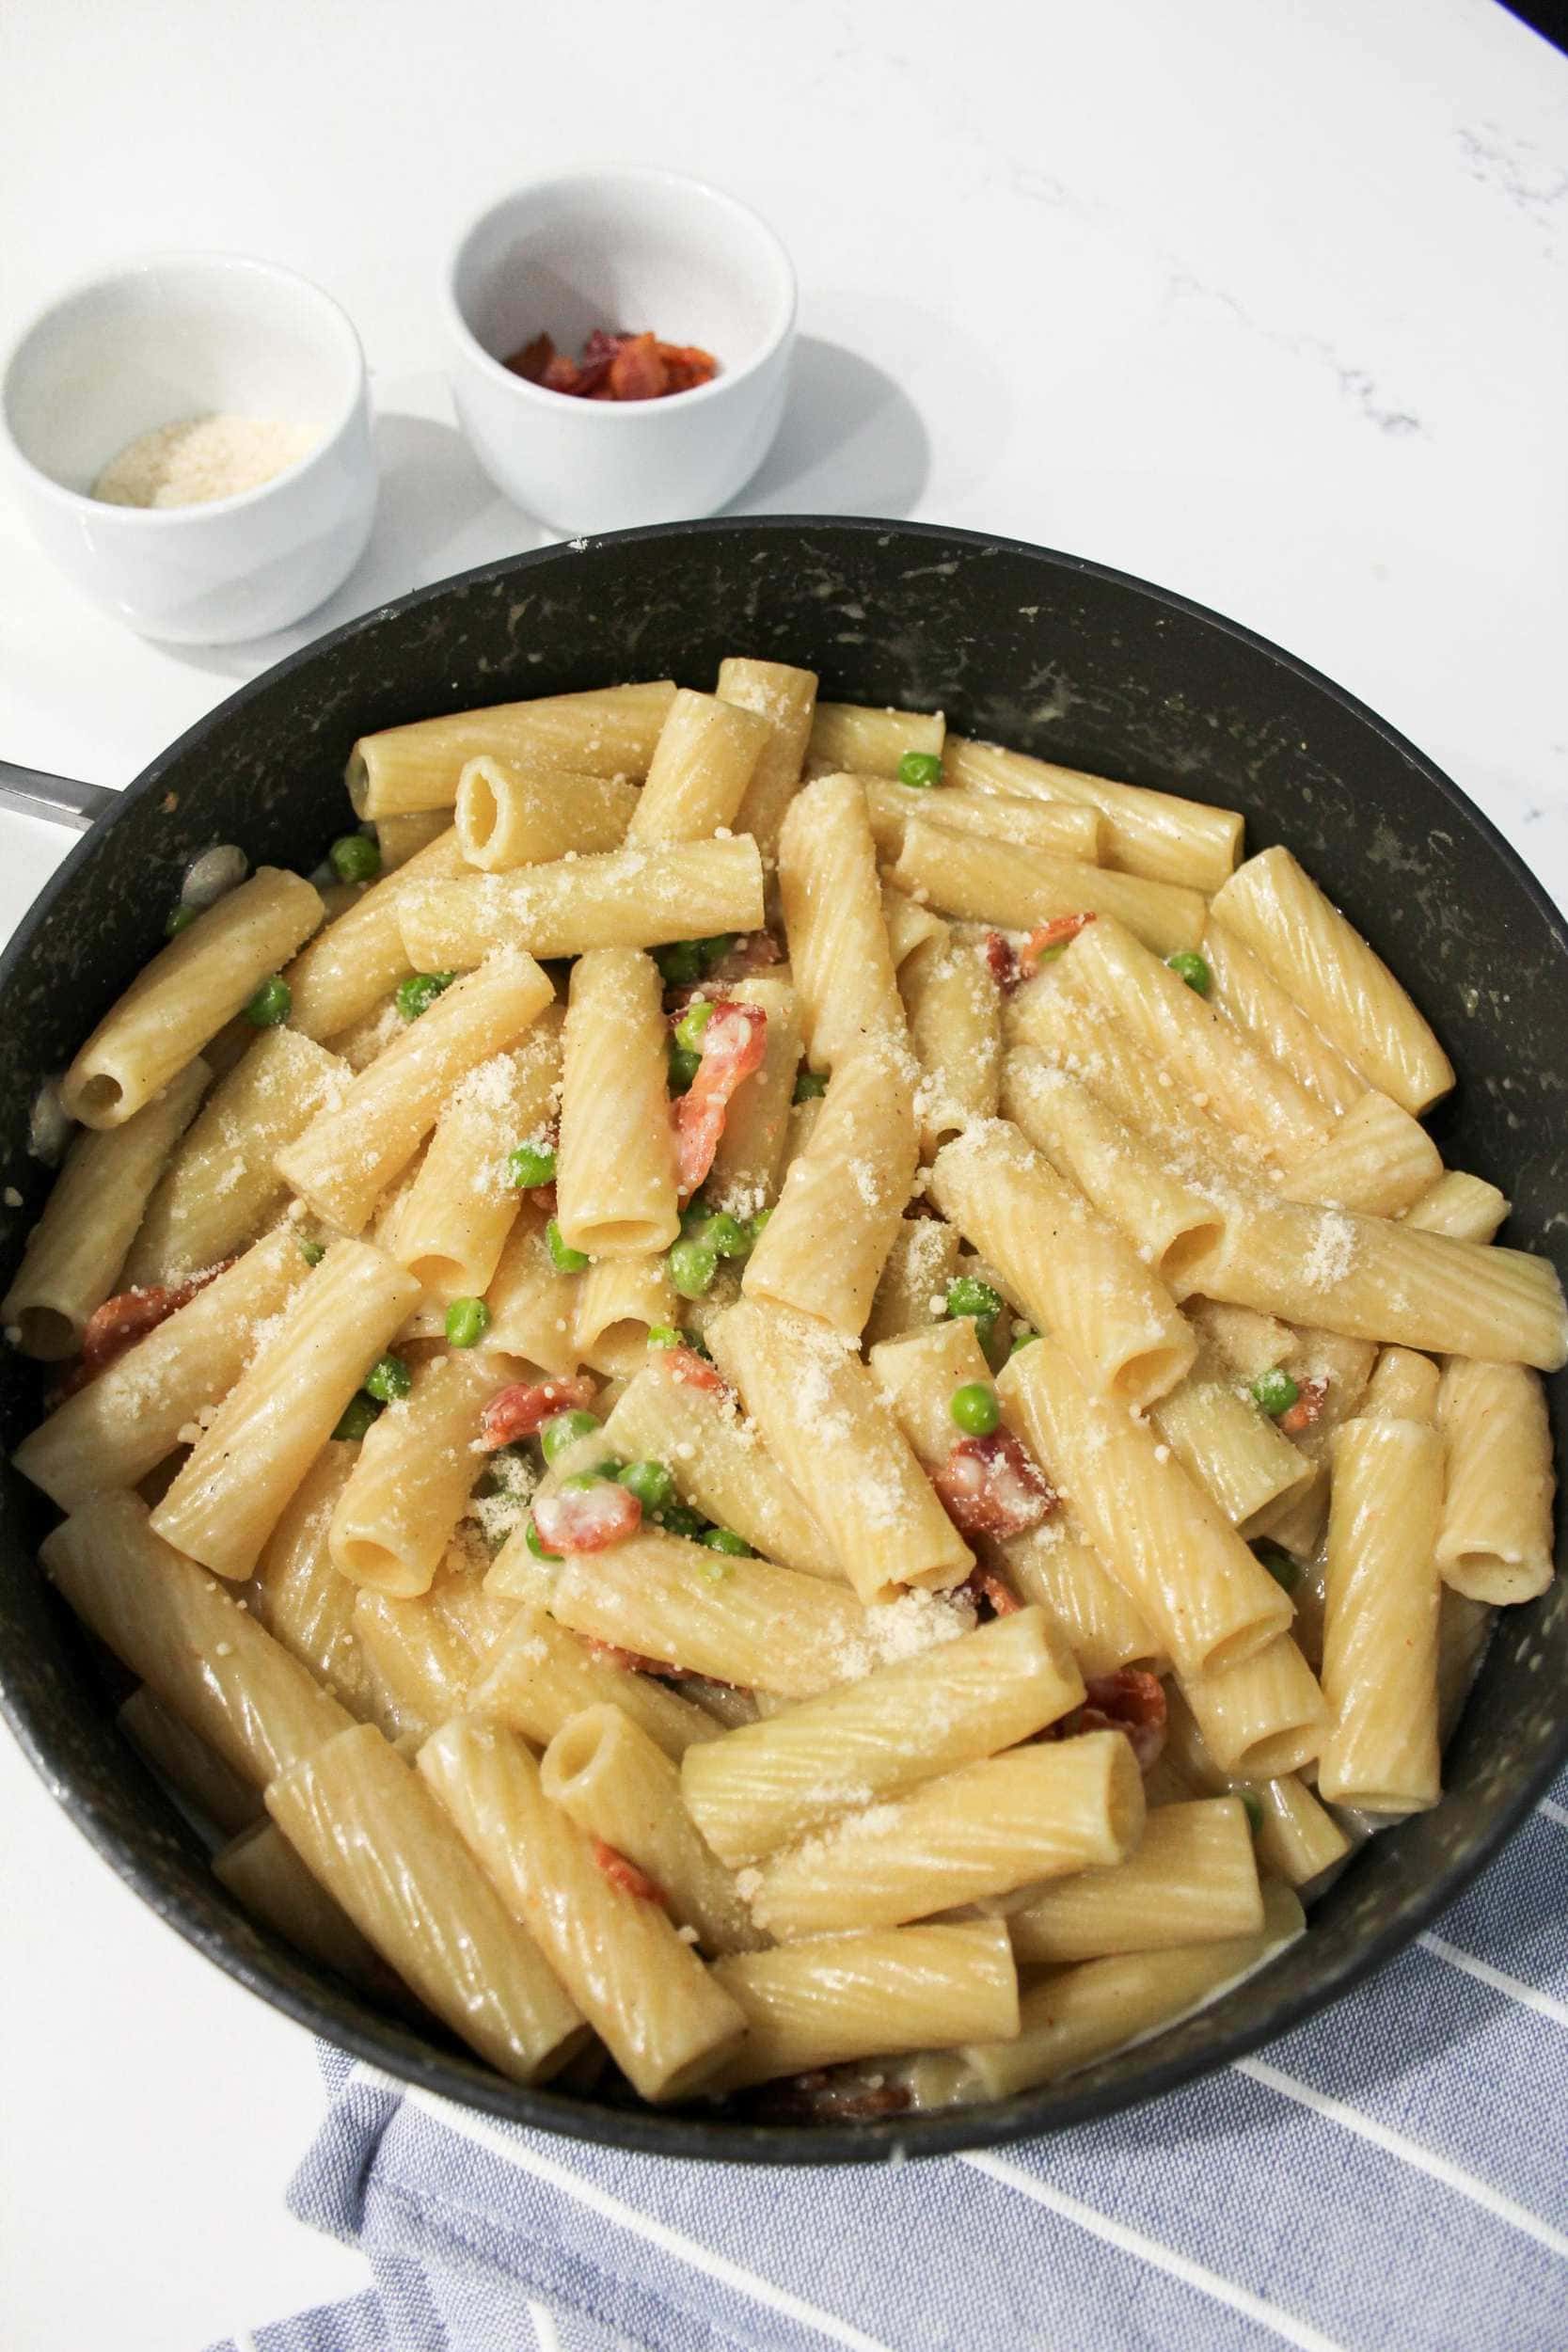 Rigatoni pasta in a light cream sauce with parmesan cheese, bacon, and peas